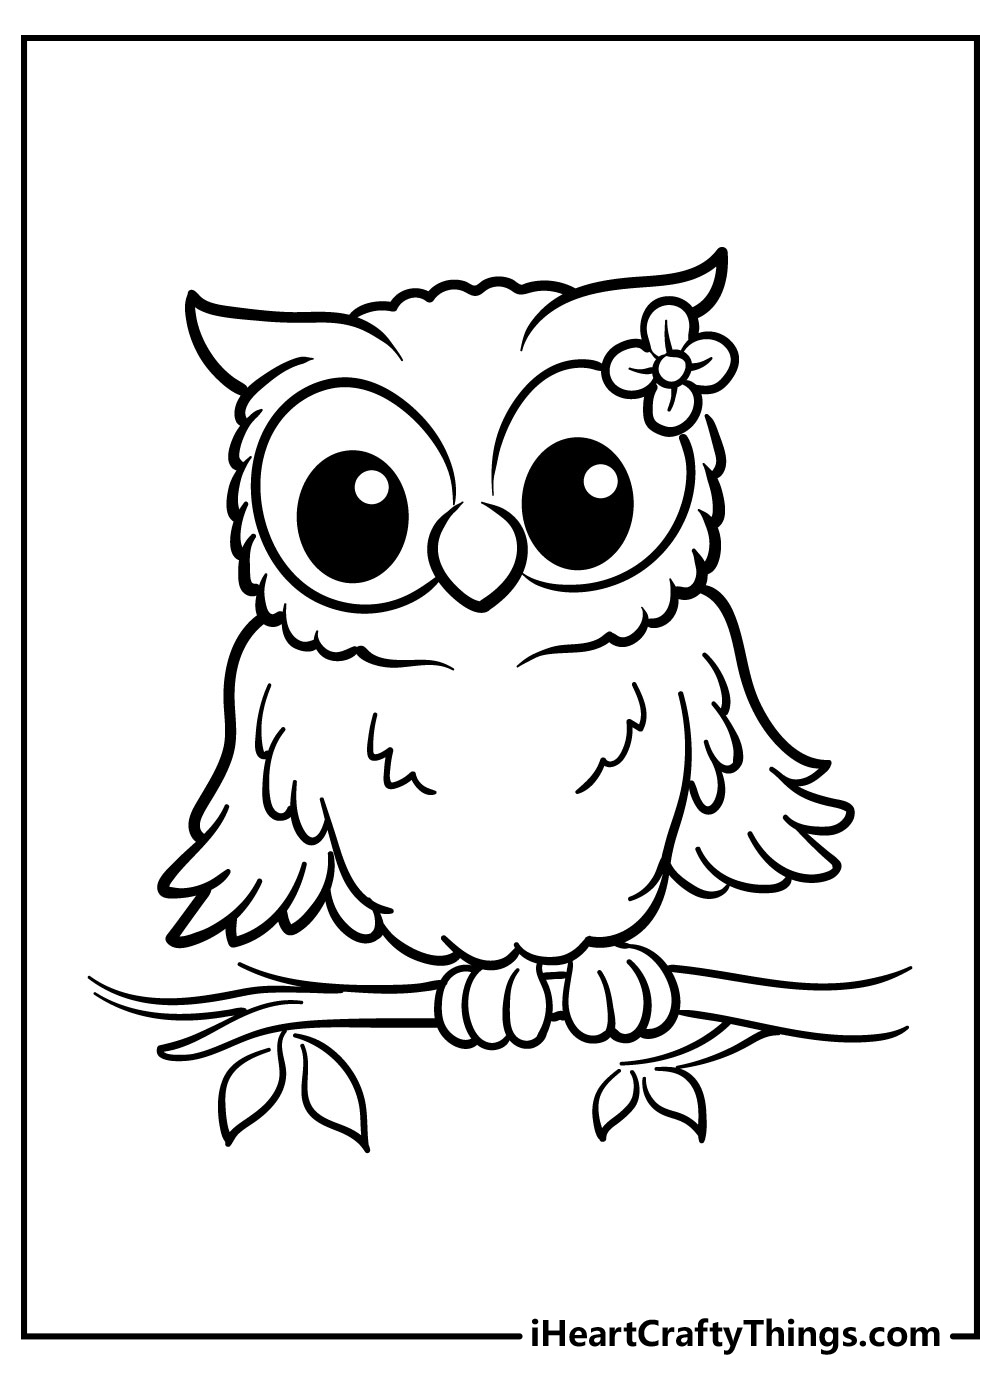 20 Wise Owl Coloring Pages Updated 20